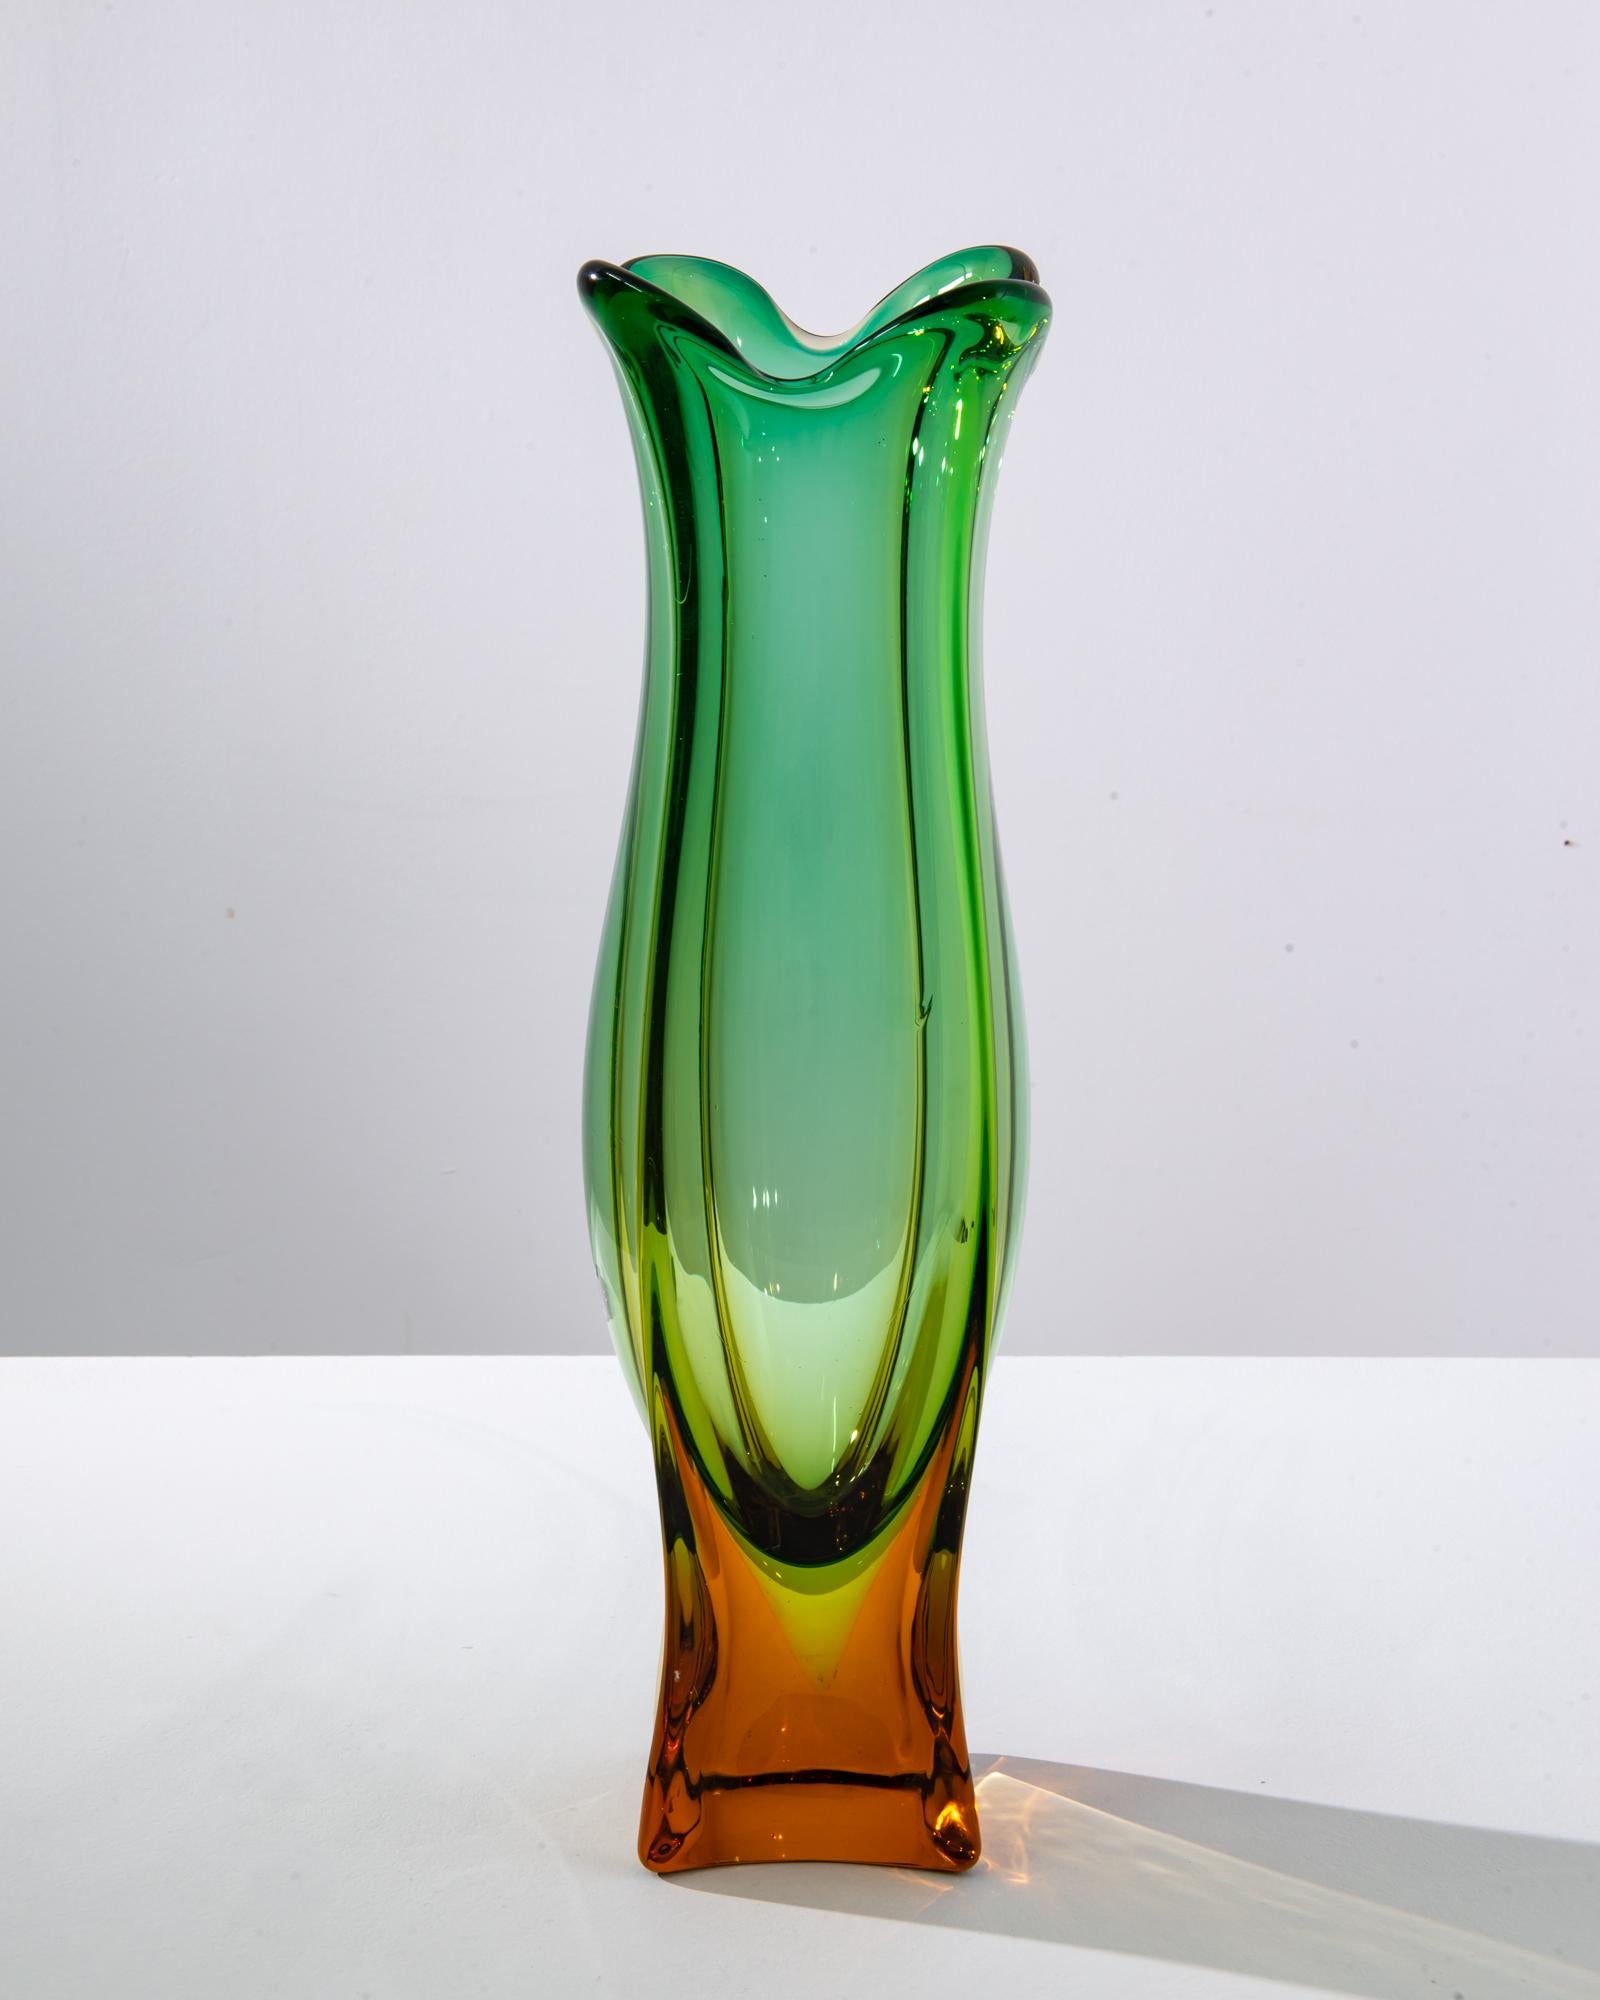 A glass vase made in 1960s Italy. This dazzling vase was made by Murano Glass, a renowned manufacturer from Venetia, a region famous for thousands of years of artisanal glassblowing. Orange-yellow hues ascend towards a bulbous body of the vessel,